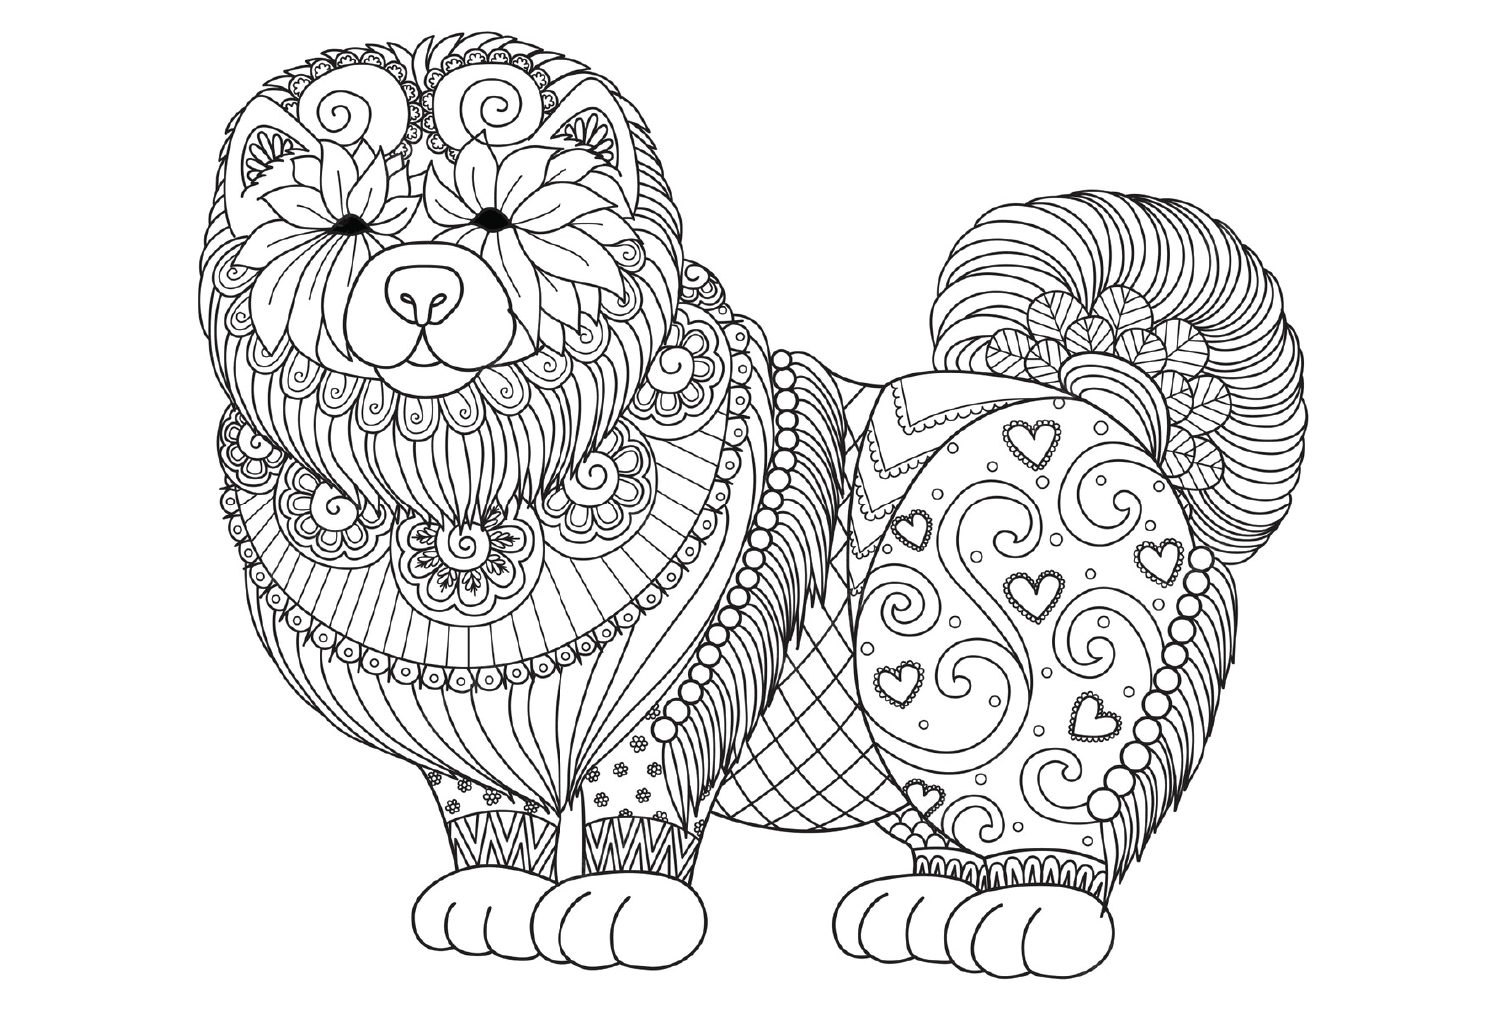 Zentangle Dog Coloring Pages